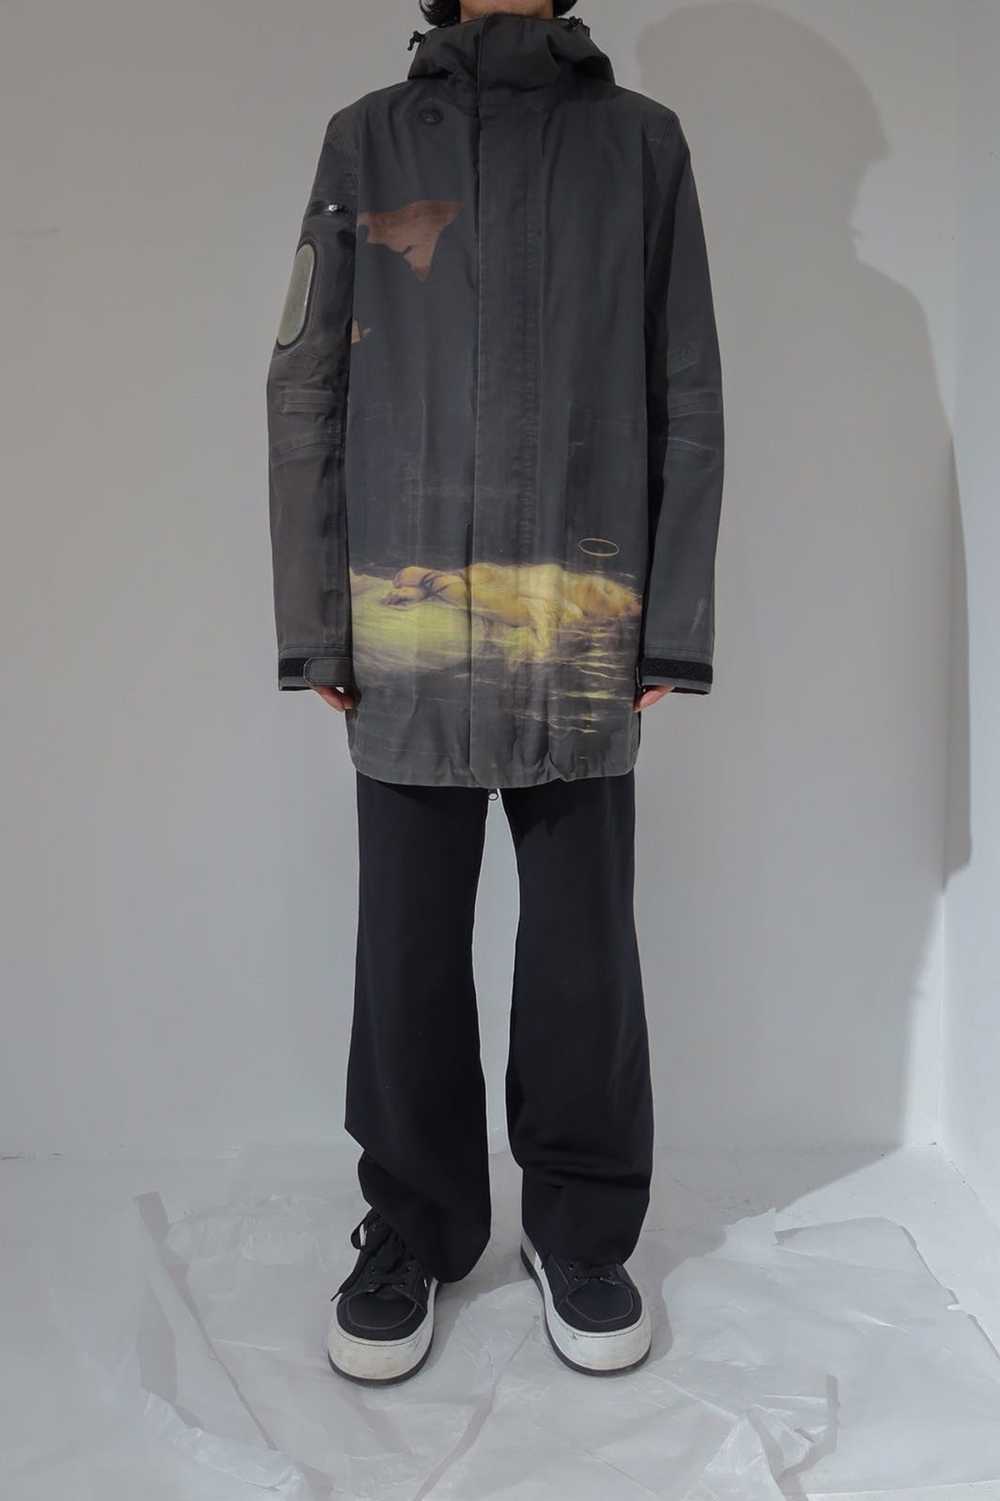 Undercover S/S 2009 Neo Boys “Young Martyr” Goret… - image 2